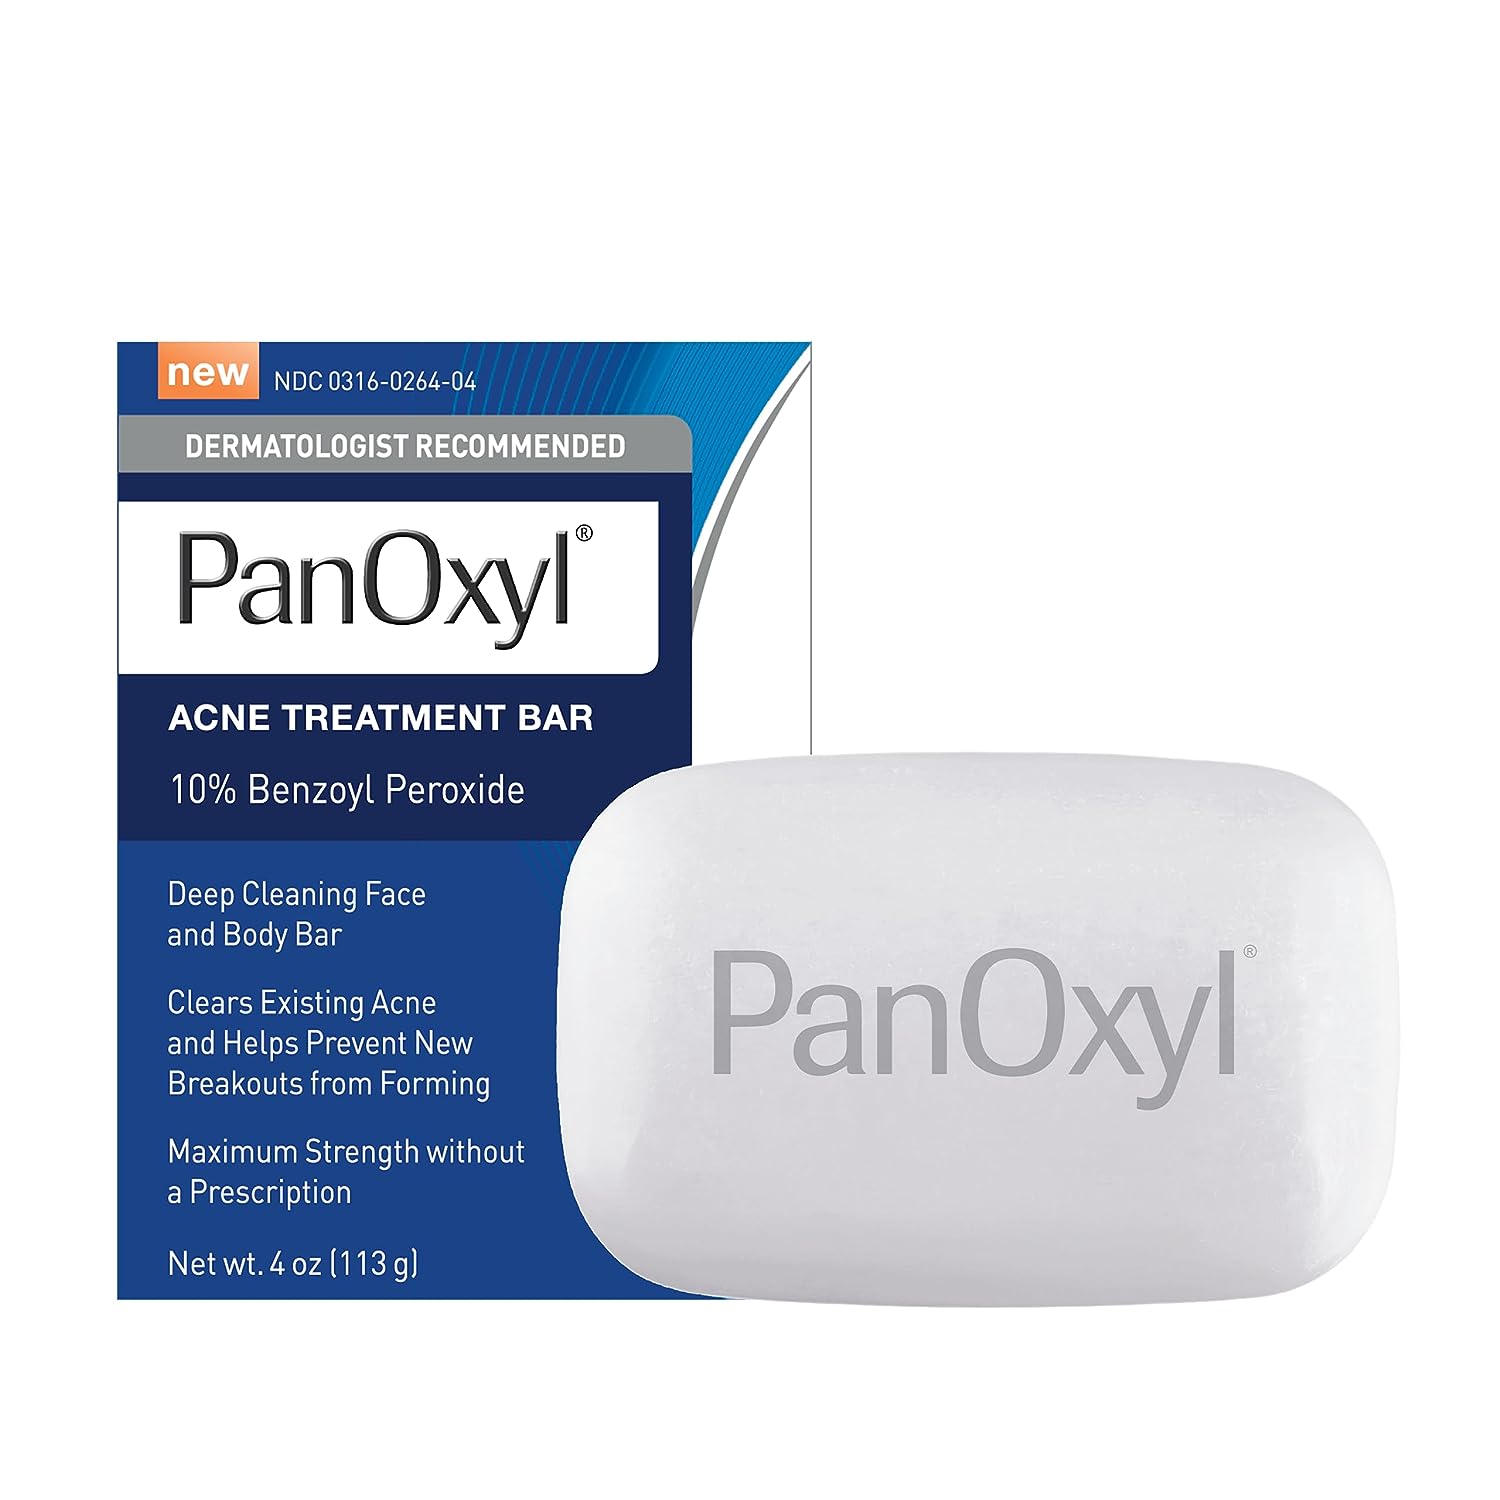 PanOxyl Acne Treatment Bar with 10% Benzoyl Peroxide, Maximum Strength Acne Bar Soap for Face, Chest and Back, Benzoyl Peroxide Bar Soap Body Wash, Vegan, For Acne Prone Skin, 4 oz